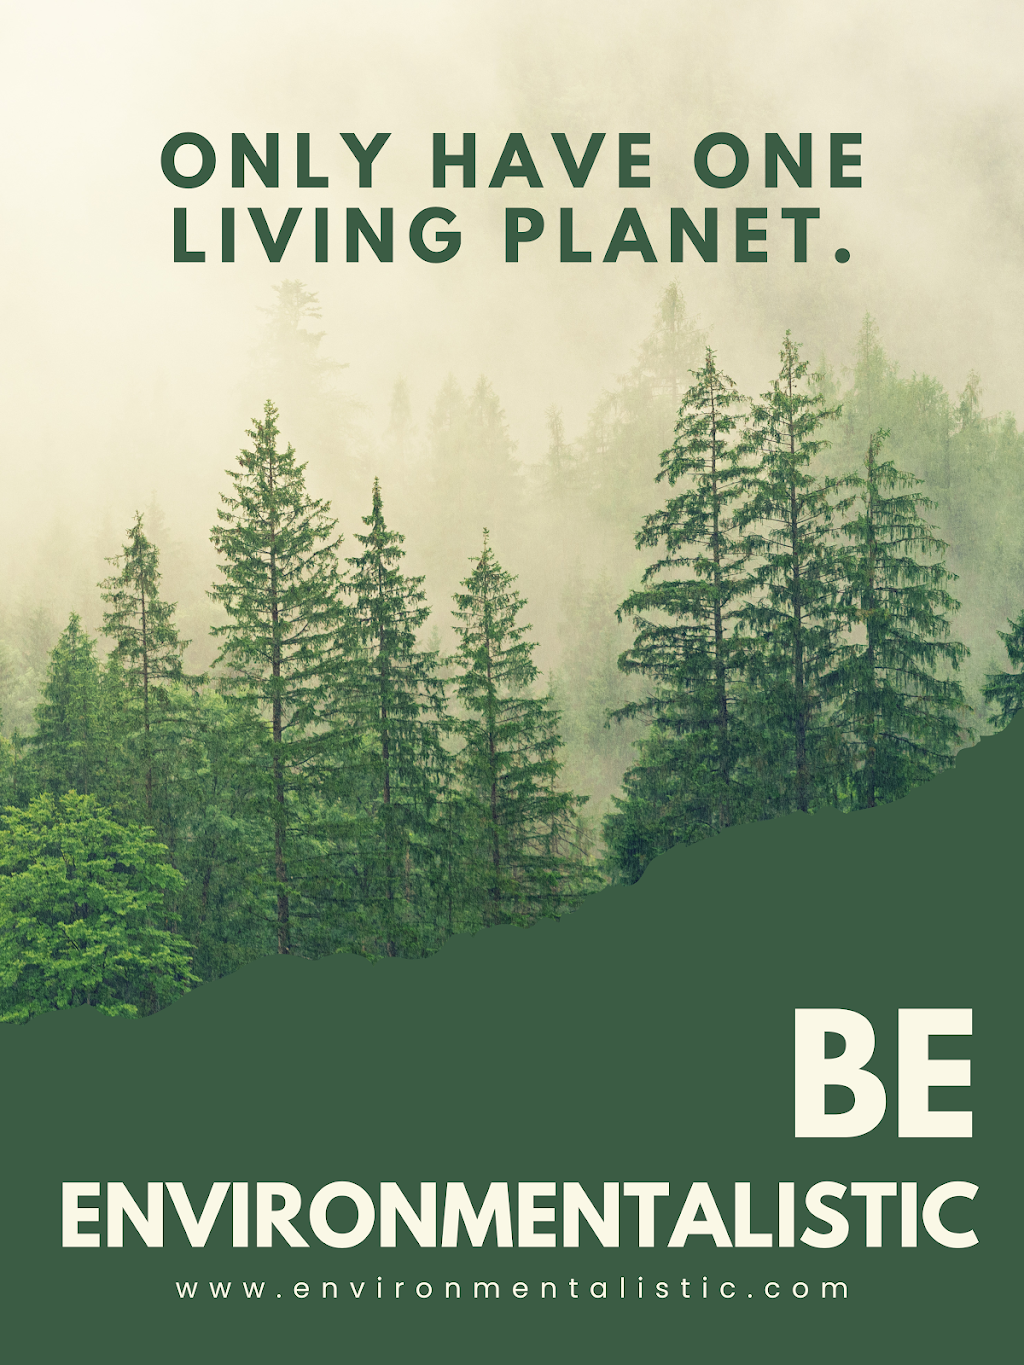 Environmentalistic | 18521 Outlet Blvd Suite 843, Chesterfield, MO 63005, USA | Phone: (314) 201-5468